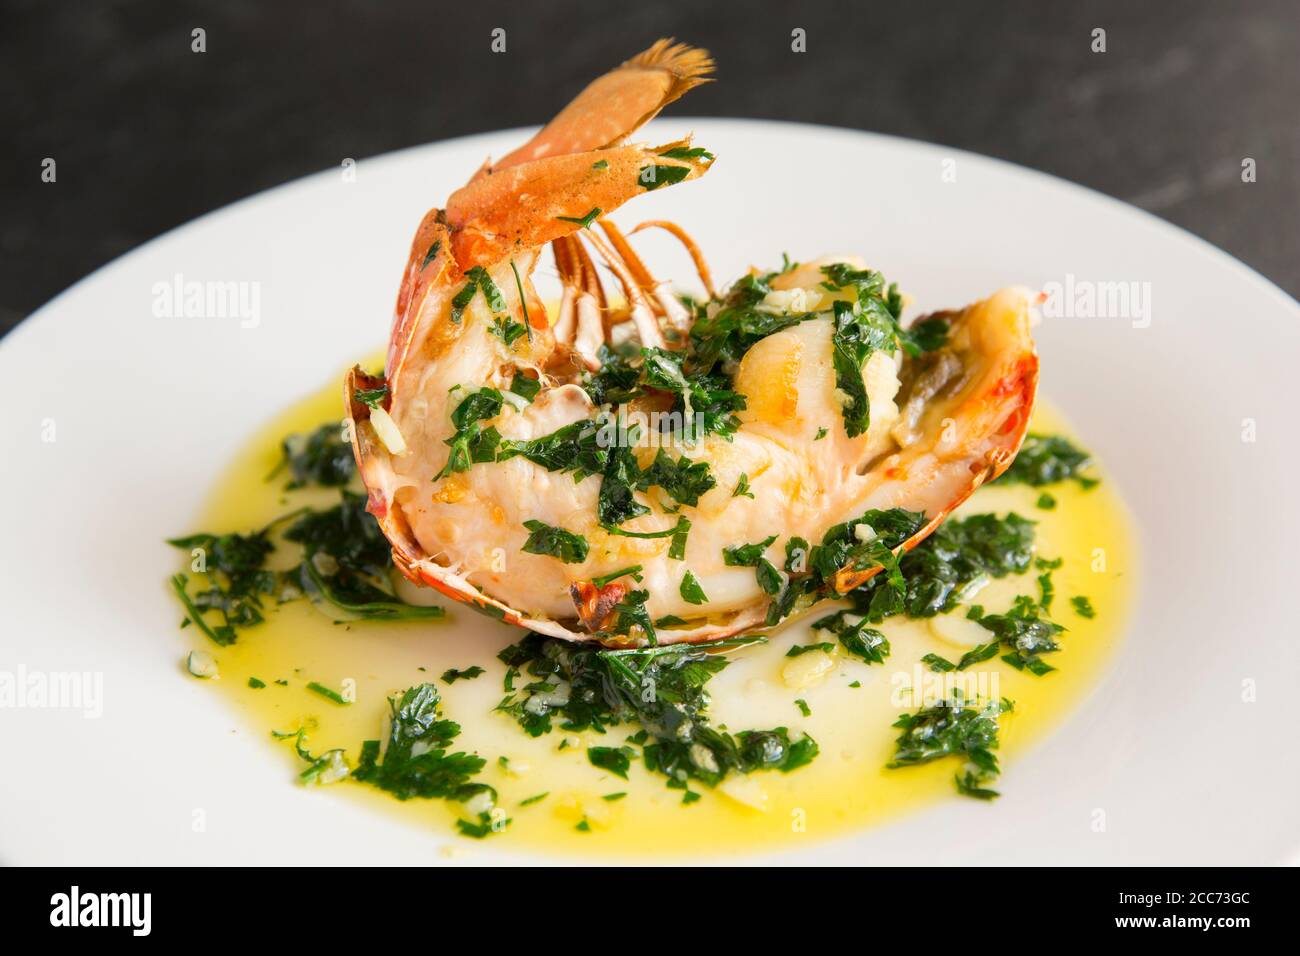 A half lobster tail, Homarus gammarus, that has been grilled and drizzled with a butter, garlic and parsley sauce. The lobster was caught in the Engli Stock Photo